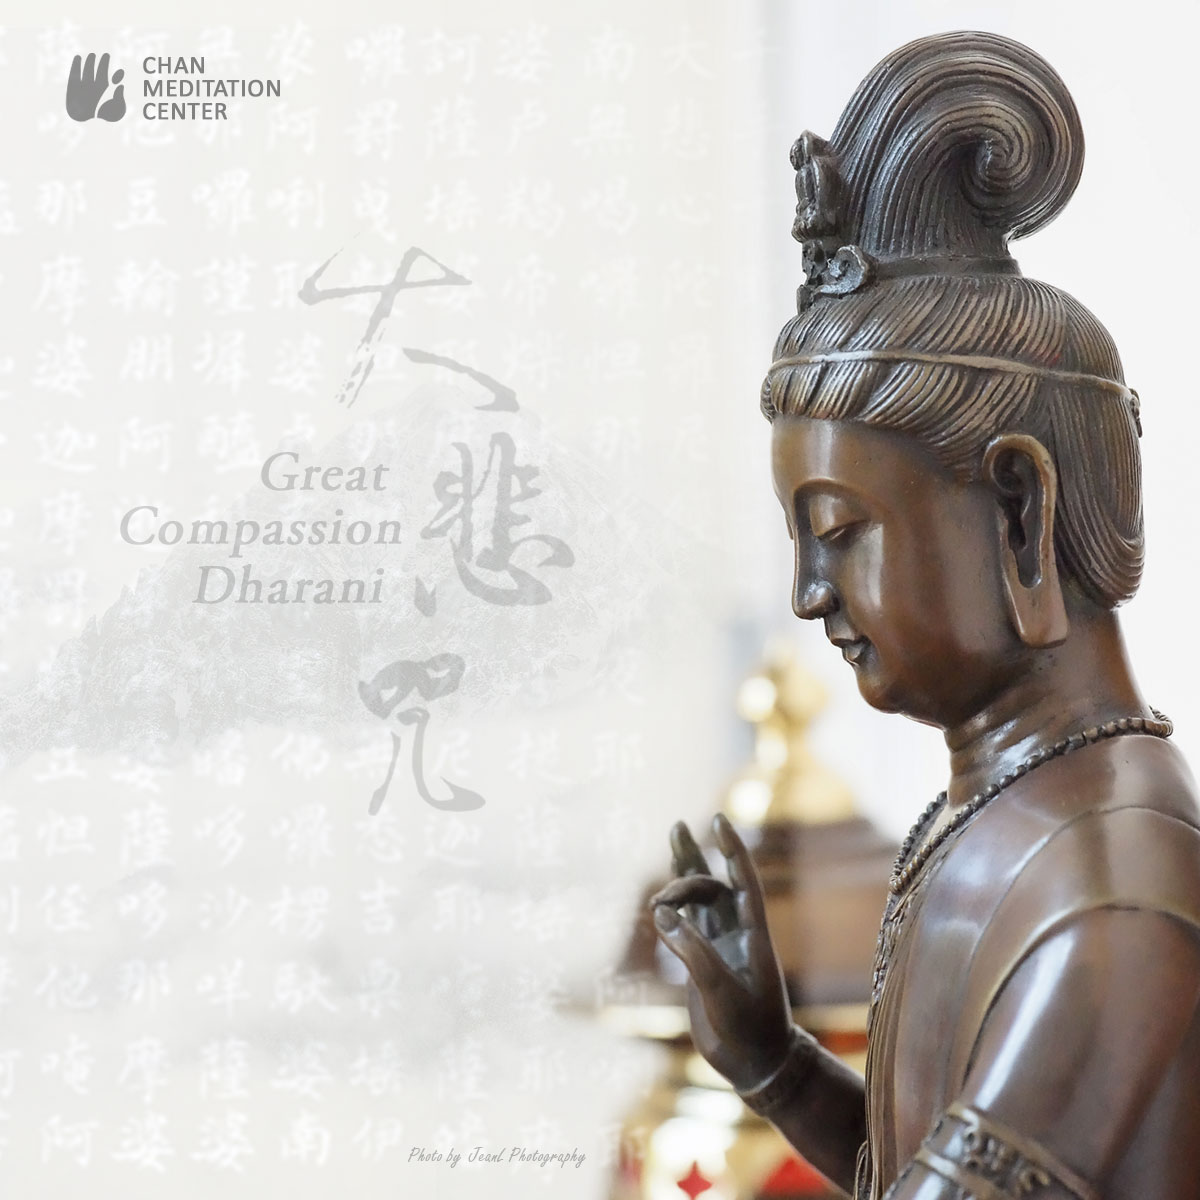 [Online] Great Compassion Dharani Evening Service (In Chinese)